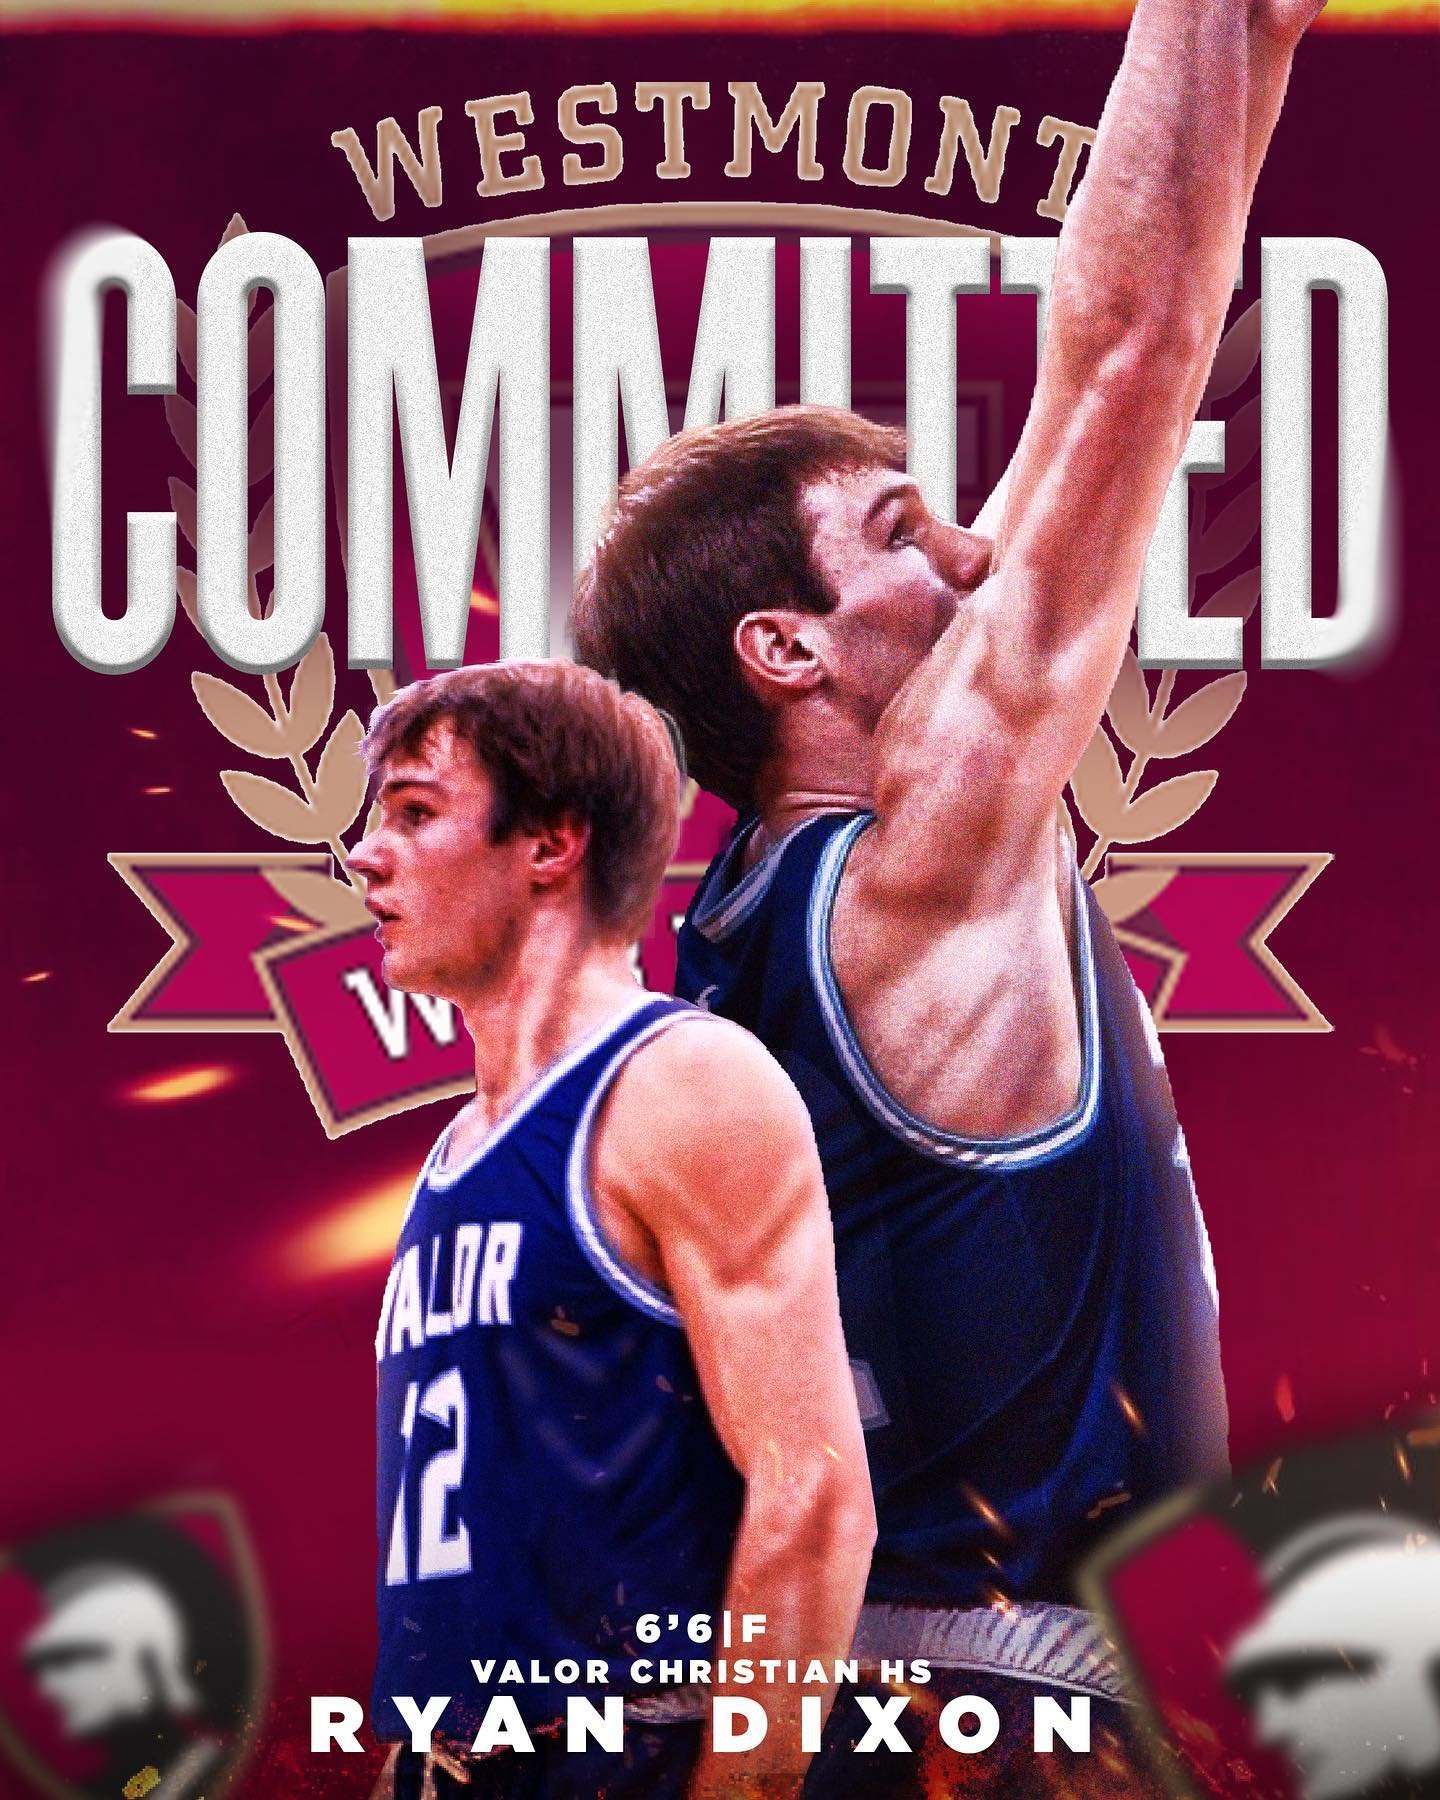 Help us congratulate our guy Ryan Dixon of Valor Christian HS on his commitment to play D2 hoops at Westmont College in Santa Barbara, California!